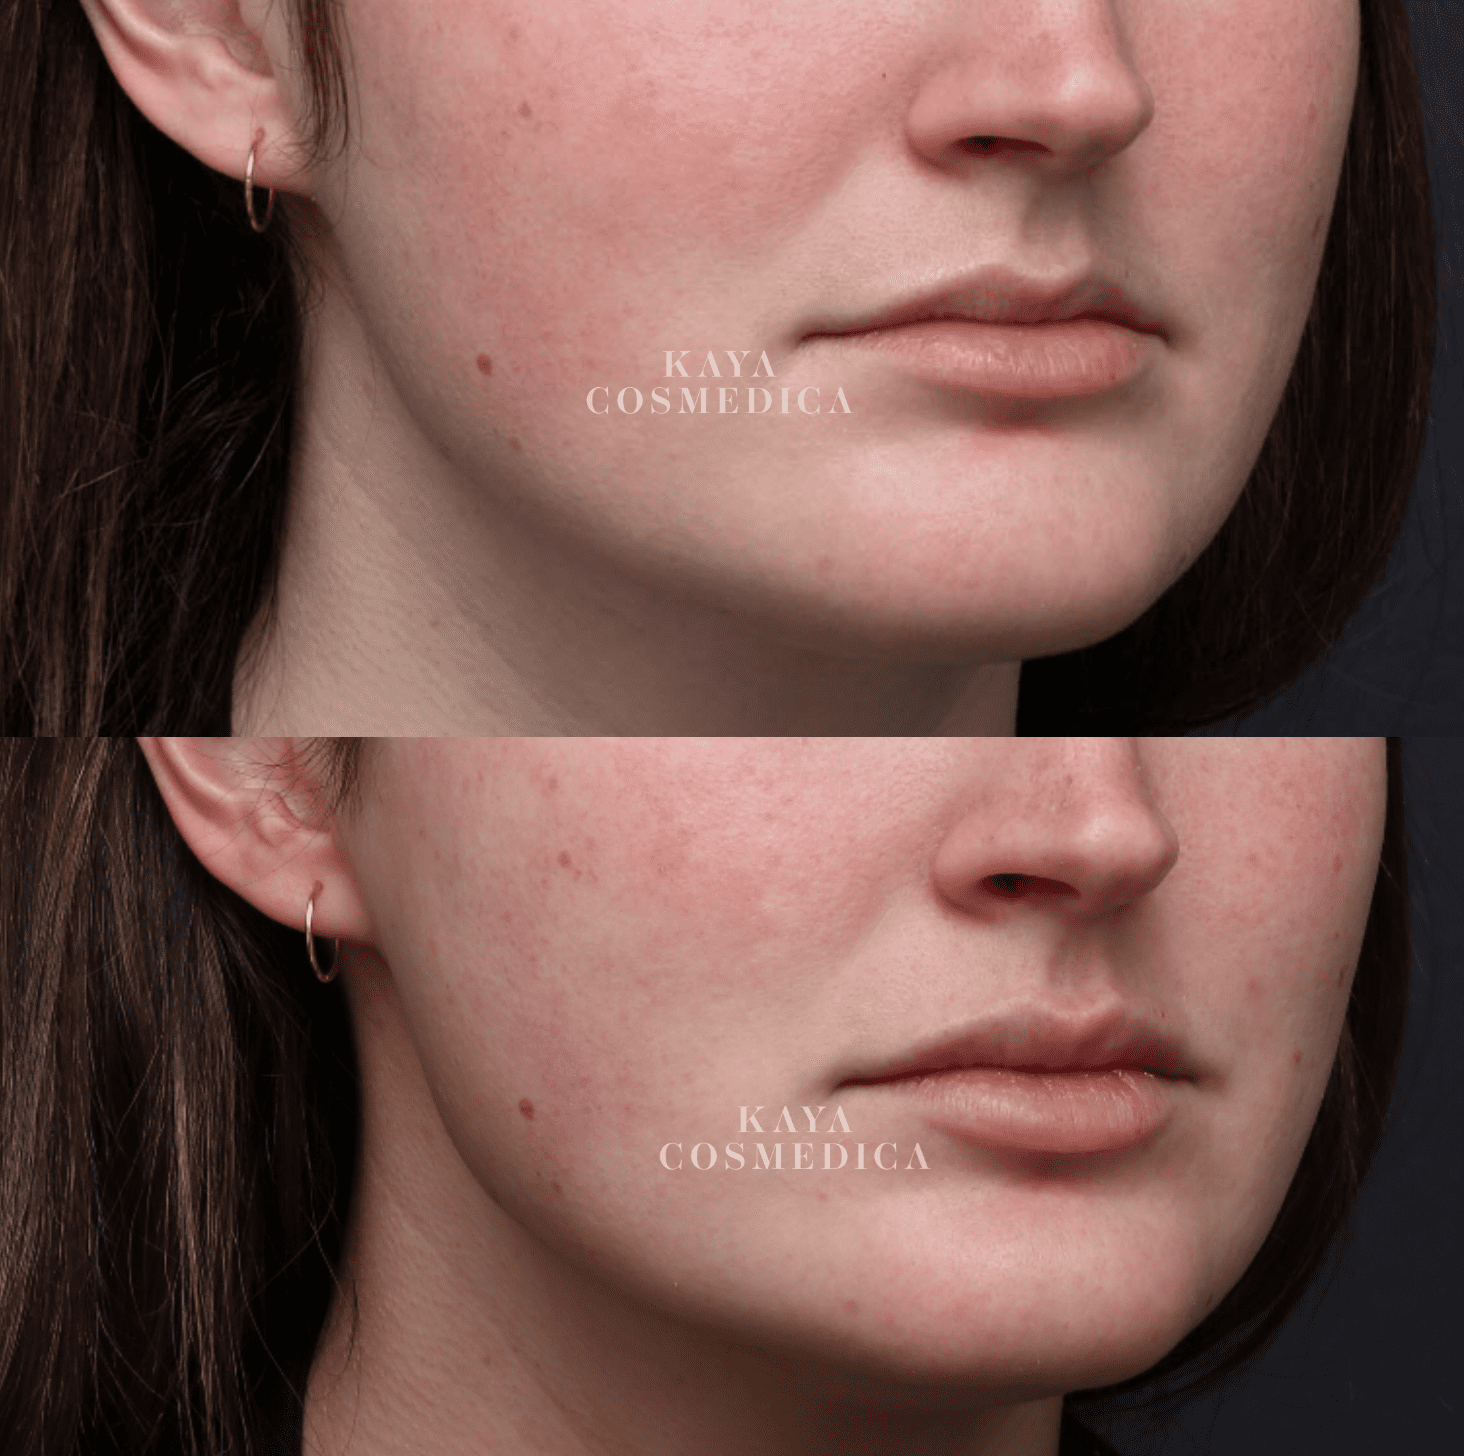 Before and after close-up images of a woman's lower face showing improvement in lip enhancement and skin texture. The photos are labeled "Kaya Cosmedica.